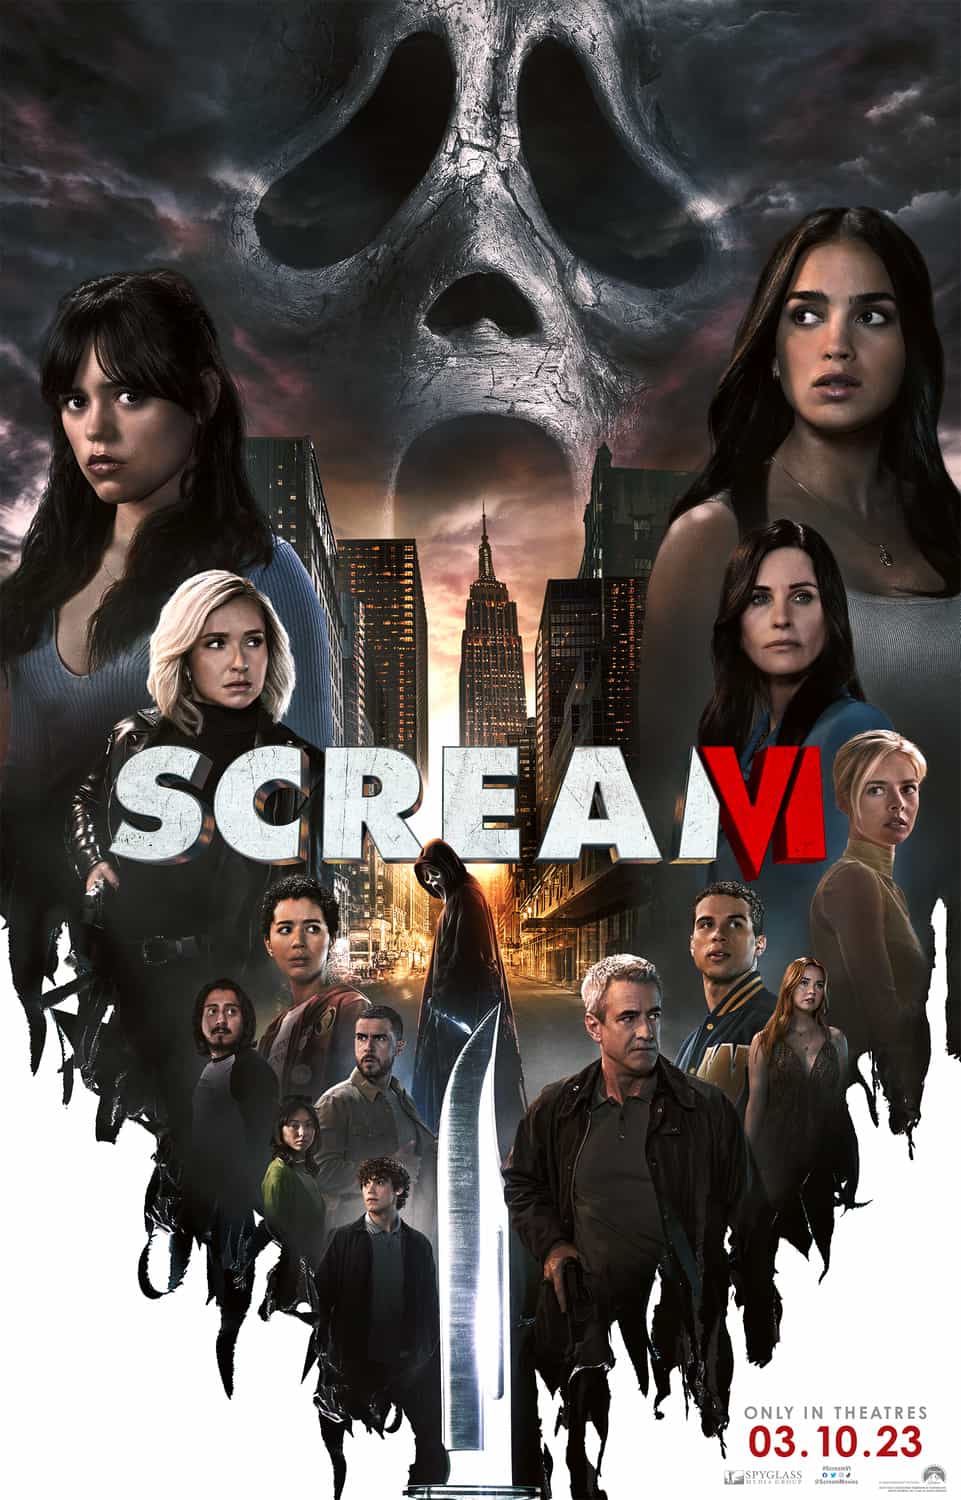 Scream VI is given an 18 age rating in the UK for strong bloody violence